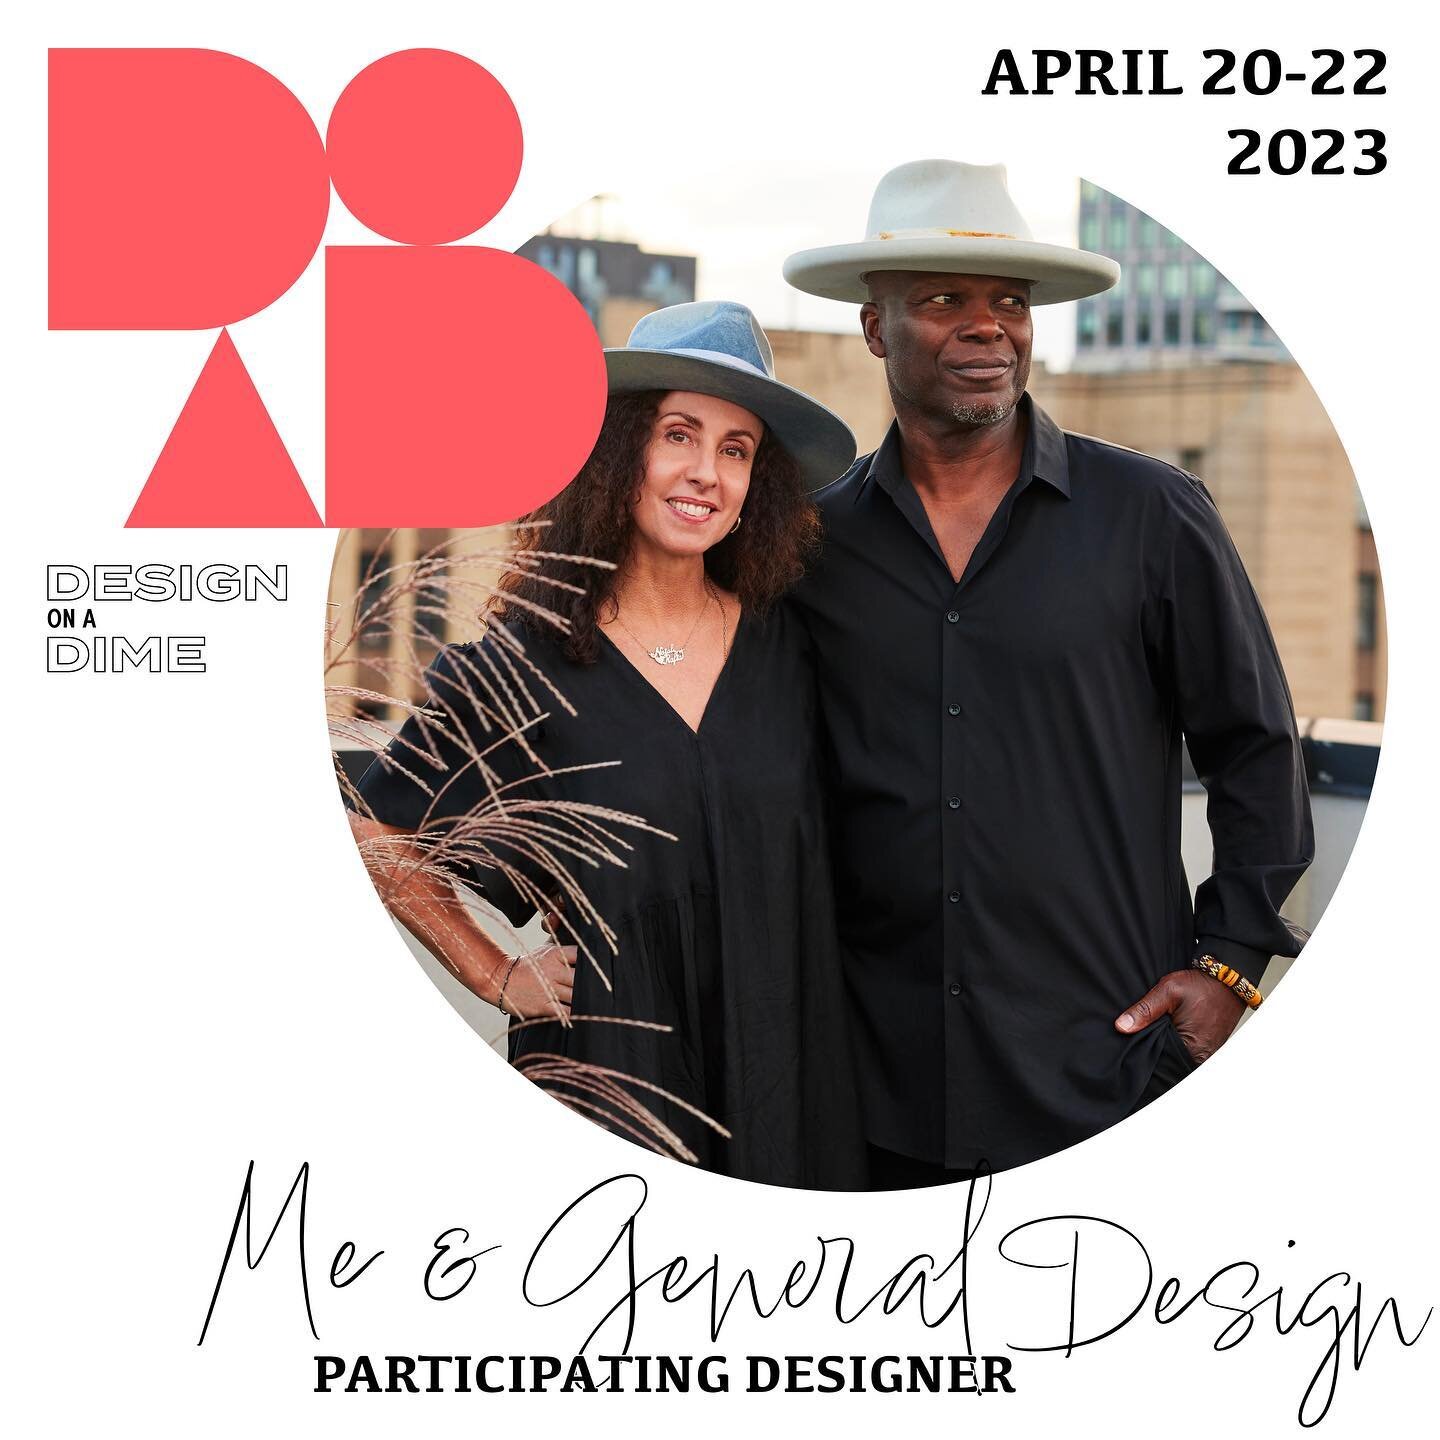 We&rsquo;re thrilled to be participating designers in @housingworks @hwdesignonadime #DesignOnADime Benefit this year! As a part of this event, we will be showcasing our design work through a one-of-a-kind vignette and curation of some our favorite b